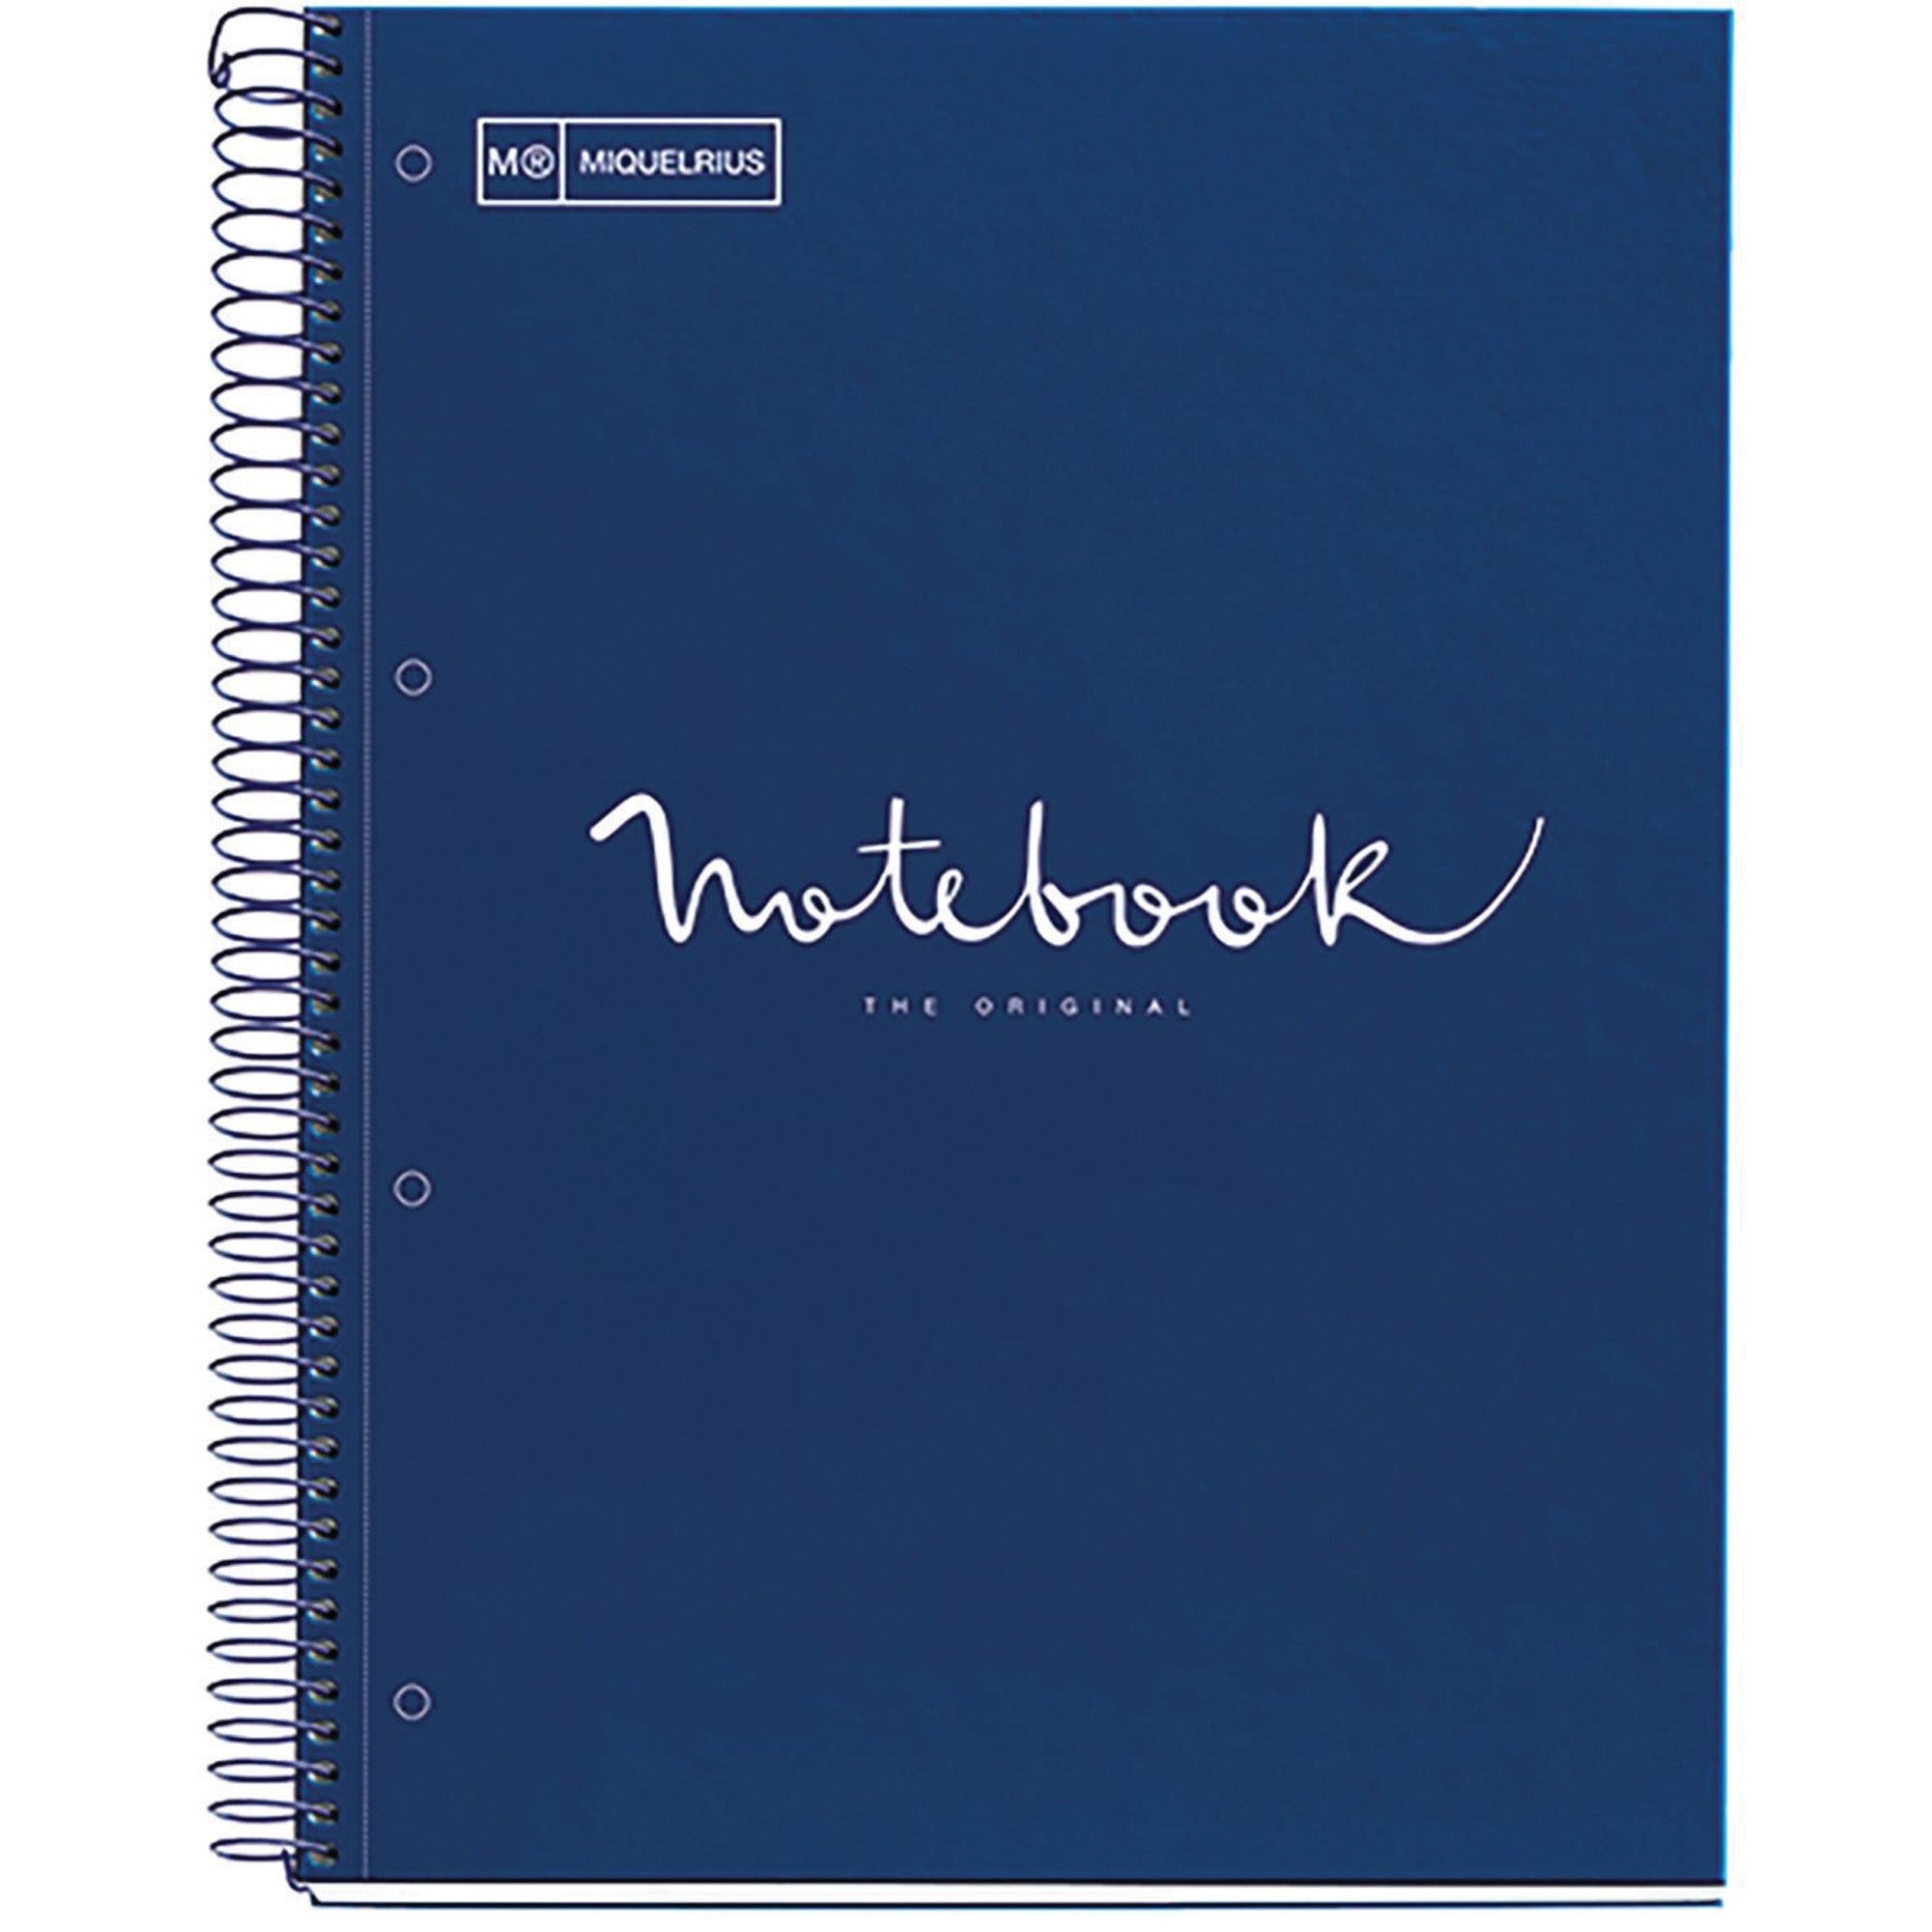 roaring-spring-fashion-tint-1-subject-notebook-1-subjects-wire-bound-3-holes-24-lb-basis-weight-030-x-85-x-11-cardboard-plastic-cover-perforated-hole-punched-sturdy-bleed-free-printed-durable-smooth-1-each_roa49272 - 1